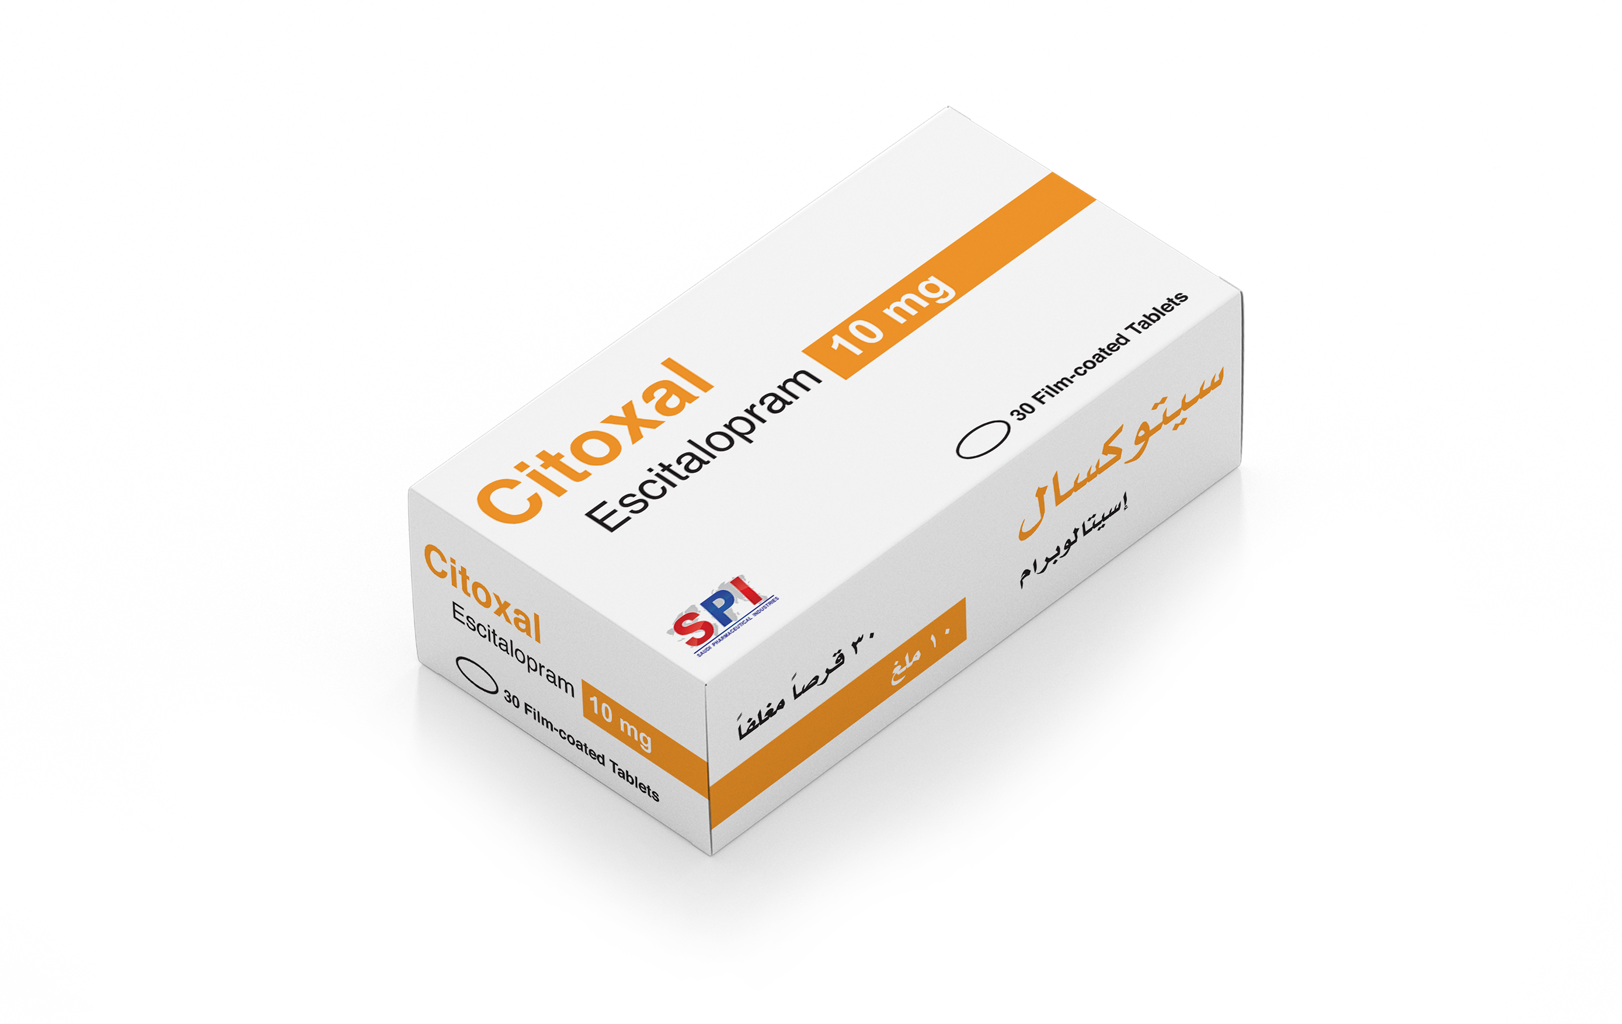 Citoxal 10 mg Film-coated Tablet